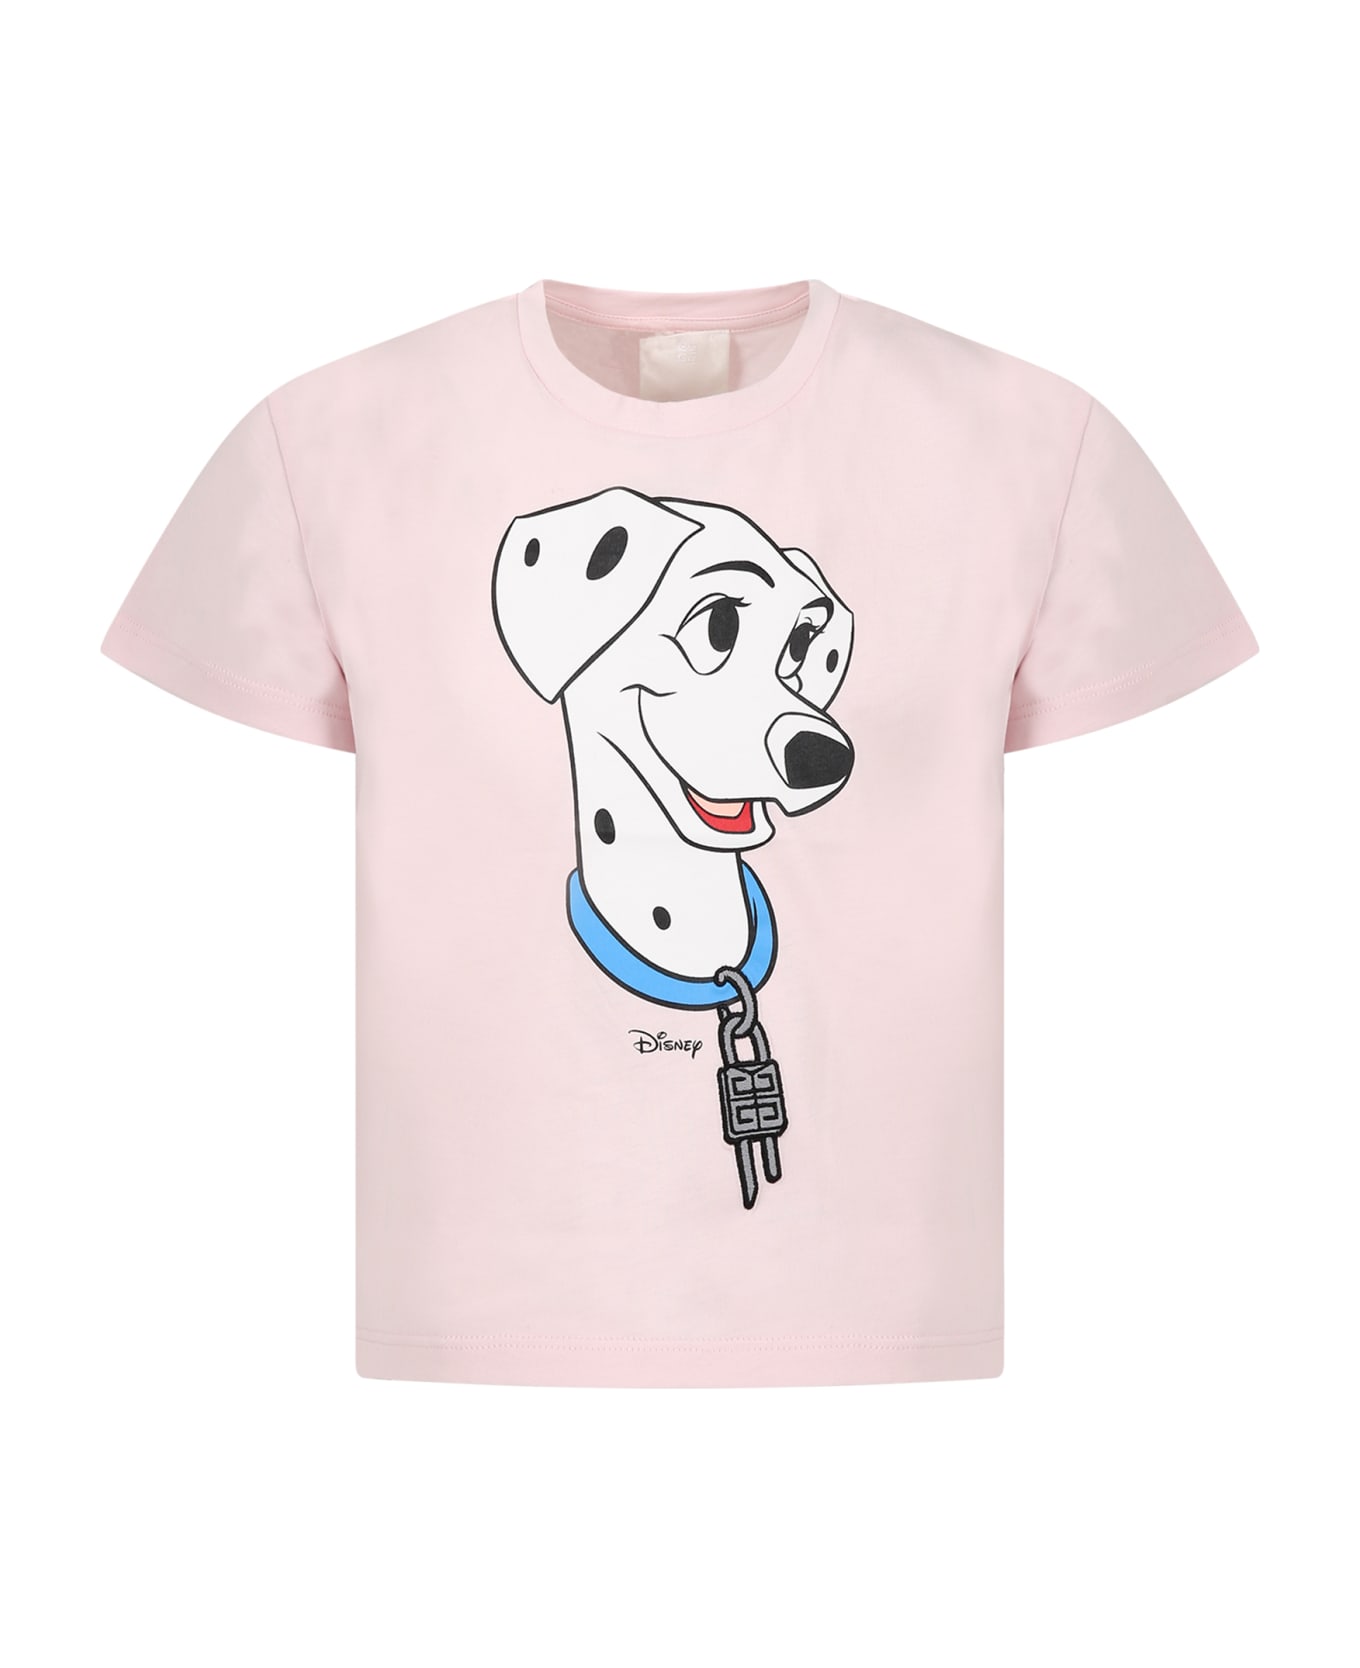 Givenchy Pink T-shirt For Girl With 101 Dalmatians Print And Logo - Pink